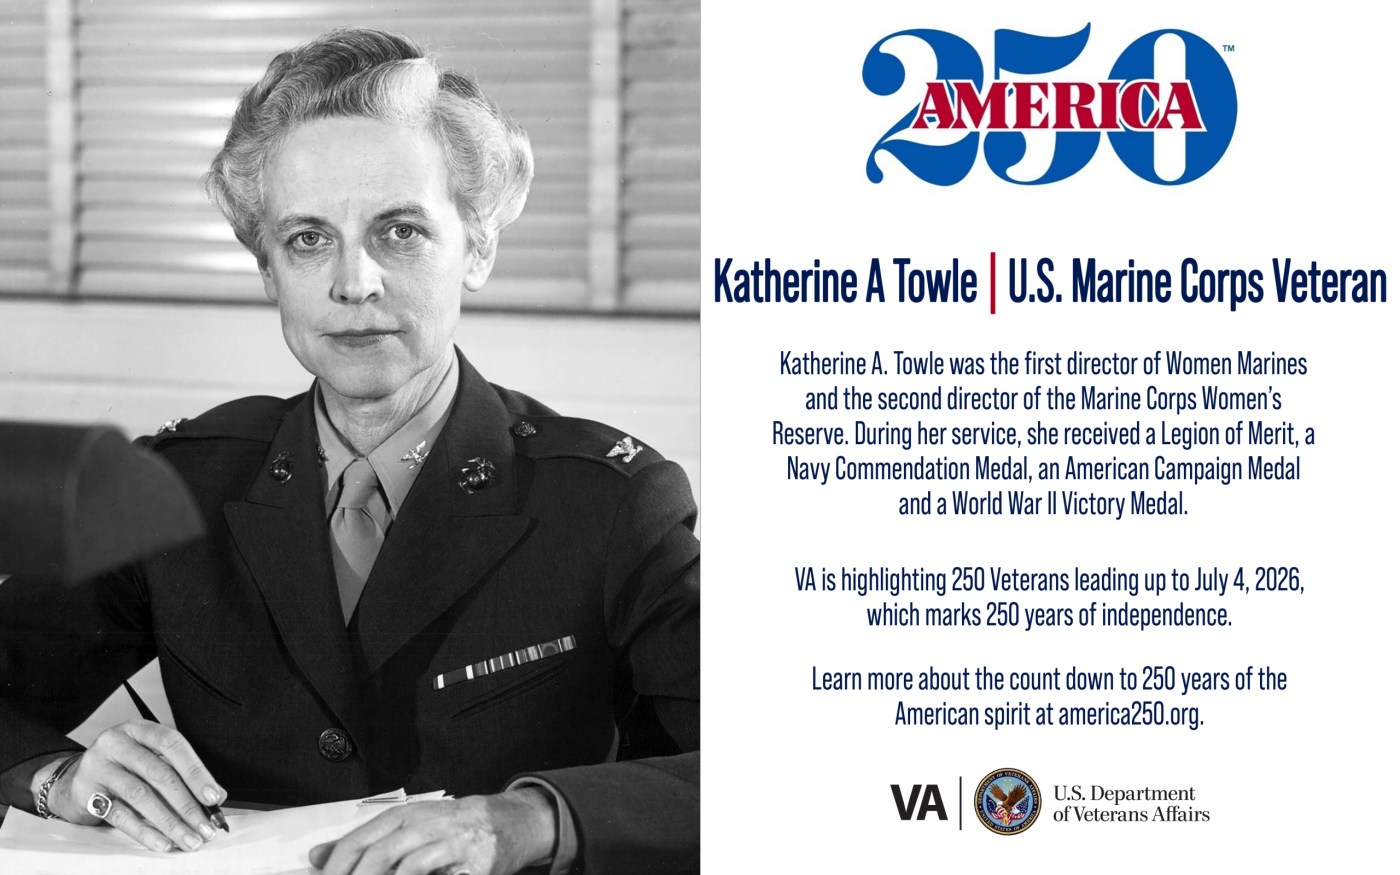 This week’s America250 salute is Marine Corps Veteran Katherine A. Towle, first director of Women Marines and the second director of the Marine Corps Women’s Reserve.